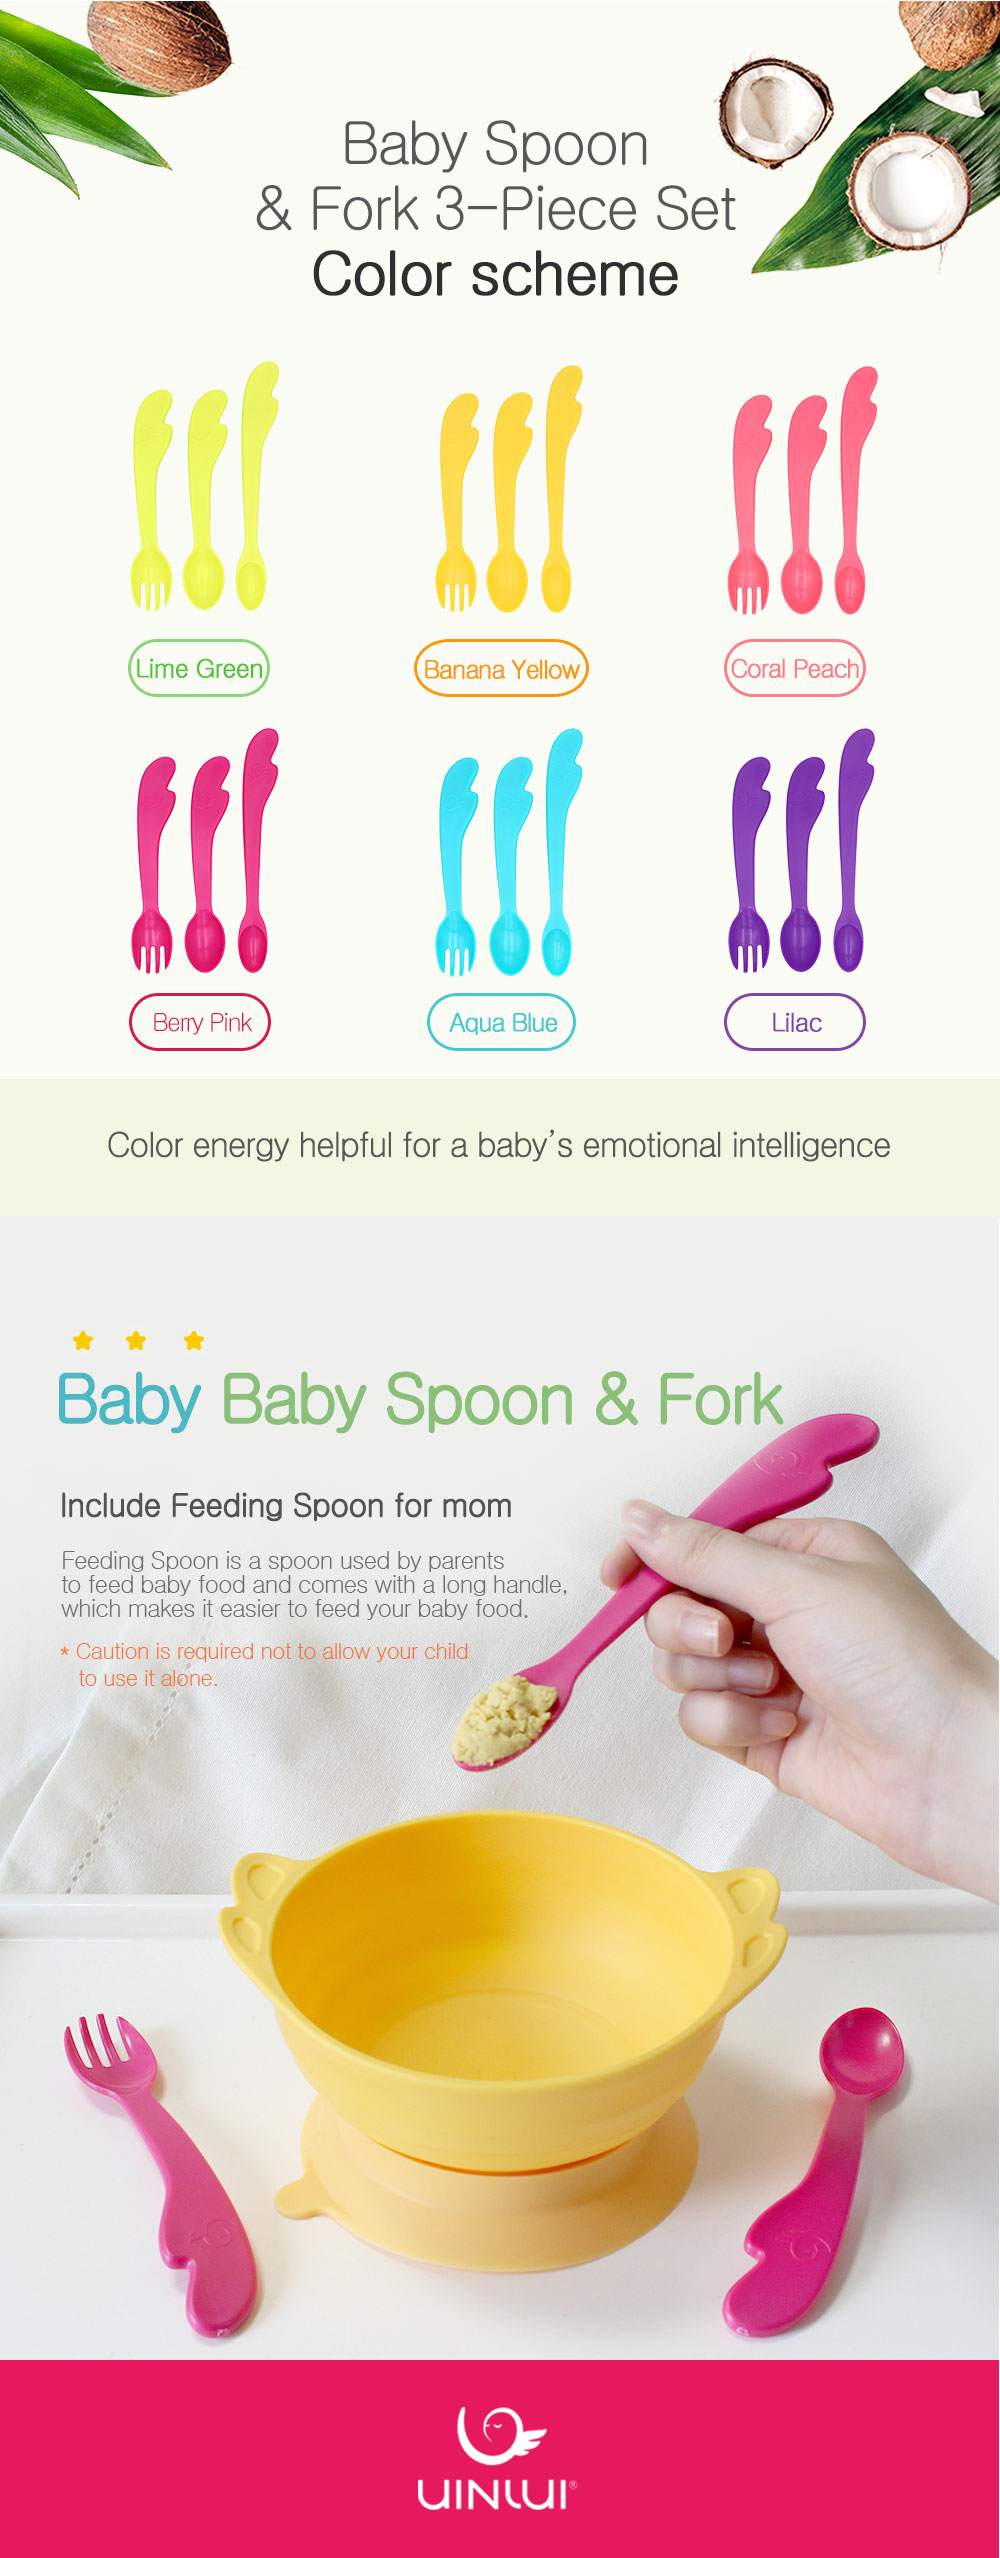 Baby Spoon & Fork 3-Piece Set